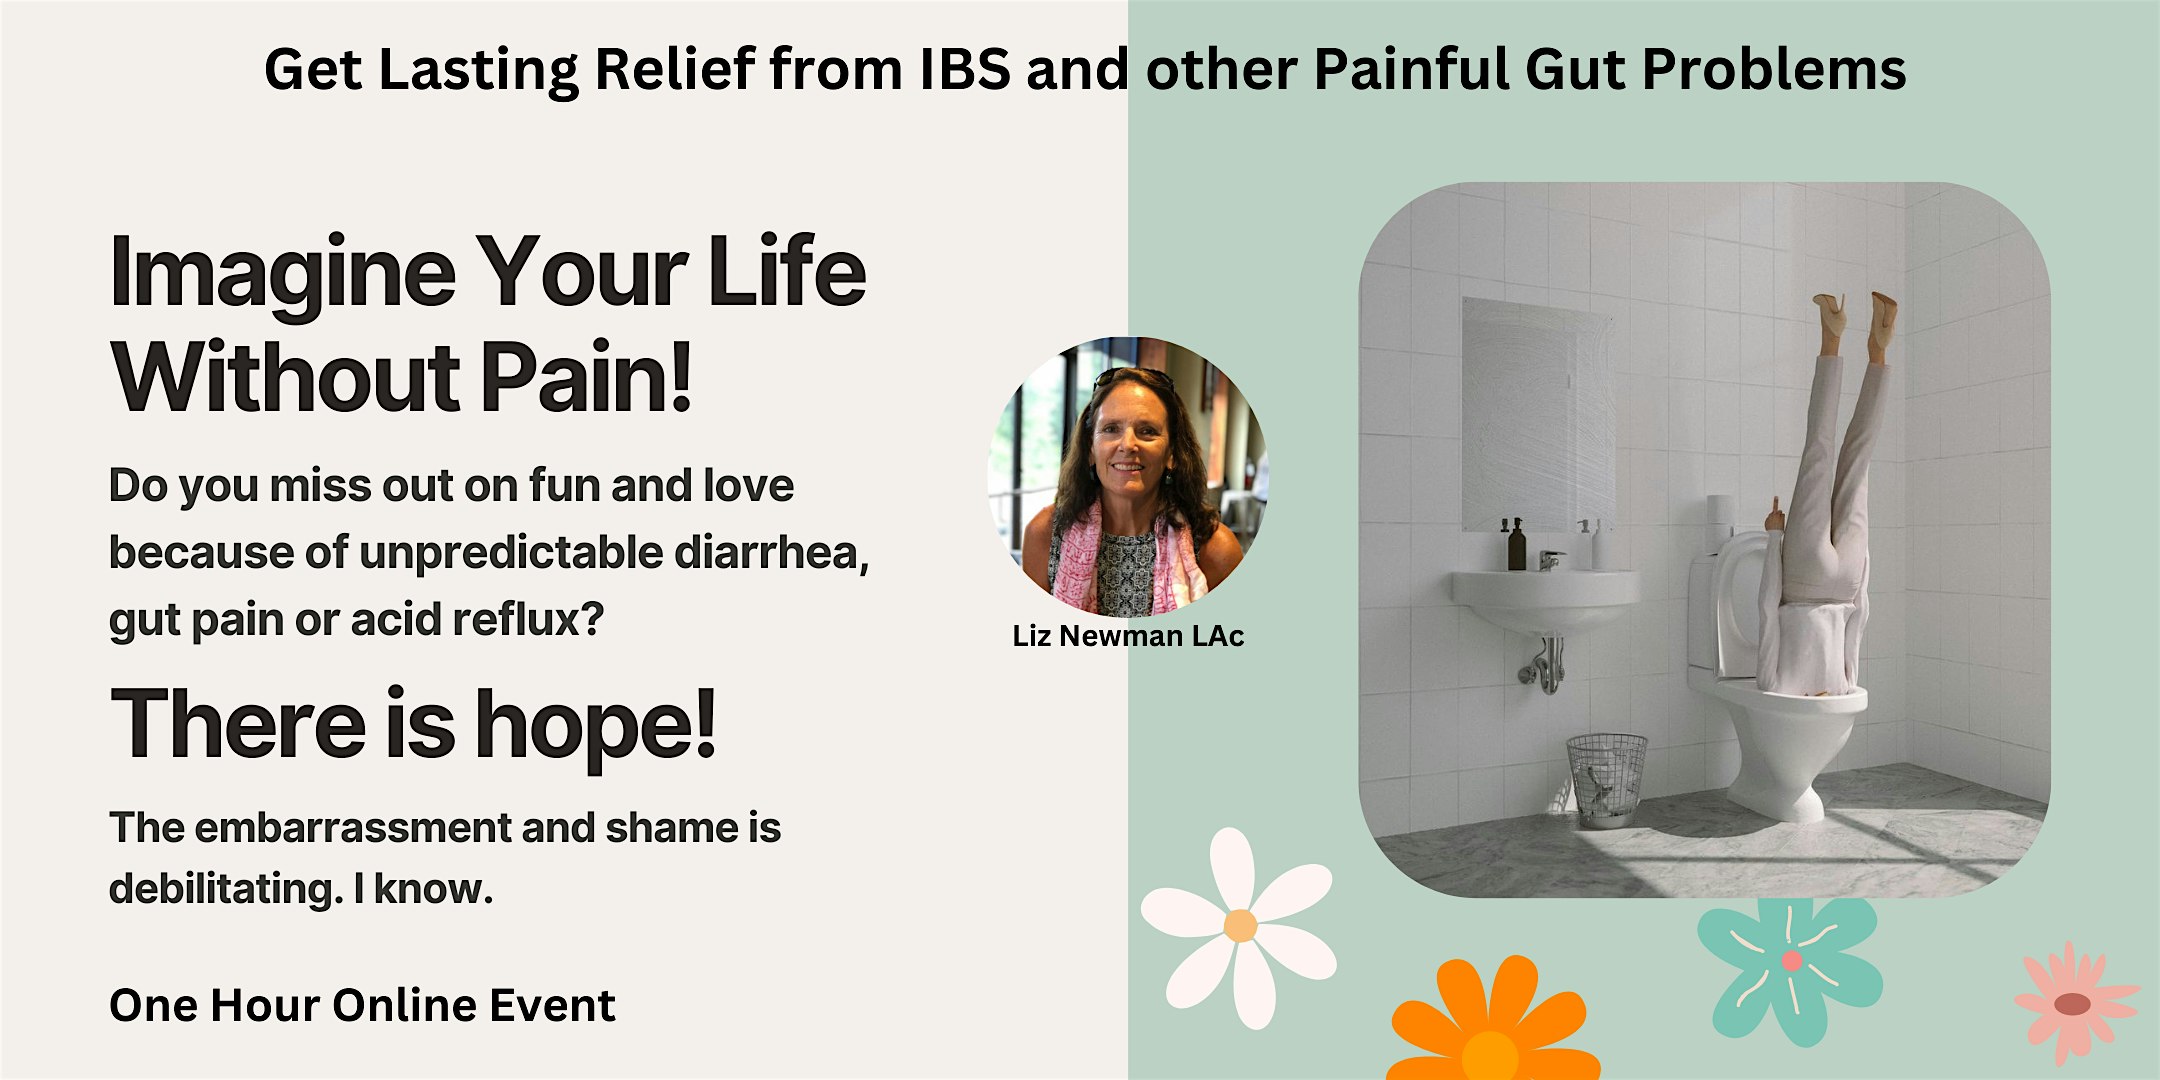 Get Lasting Relief from IBS and Painful Gut Problems - Cheyenne WY